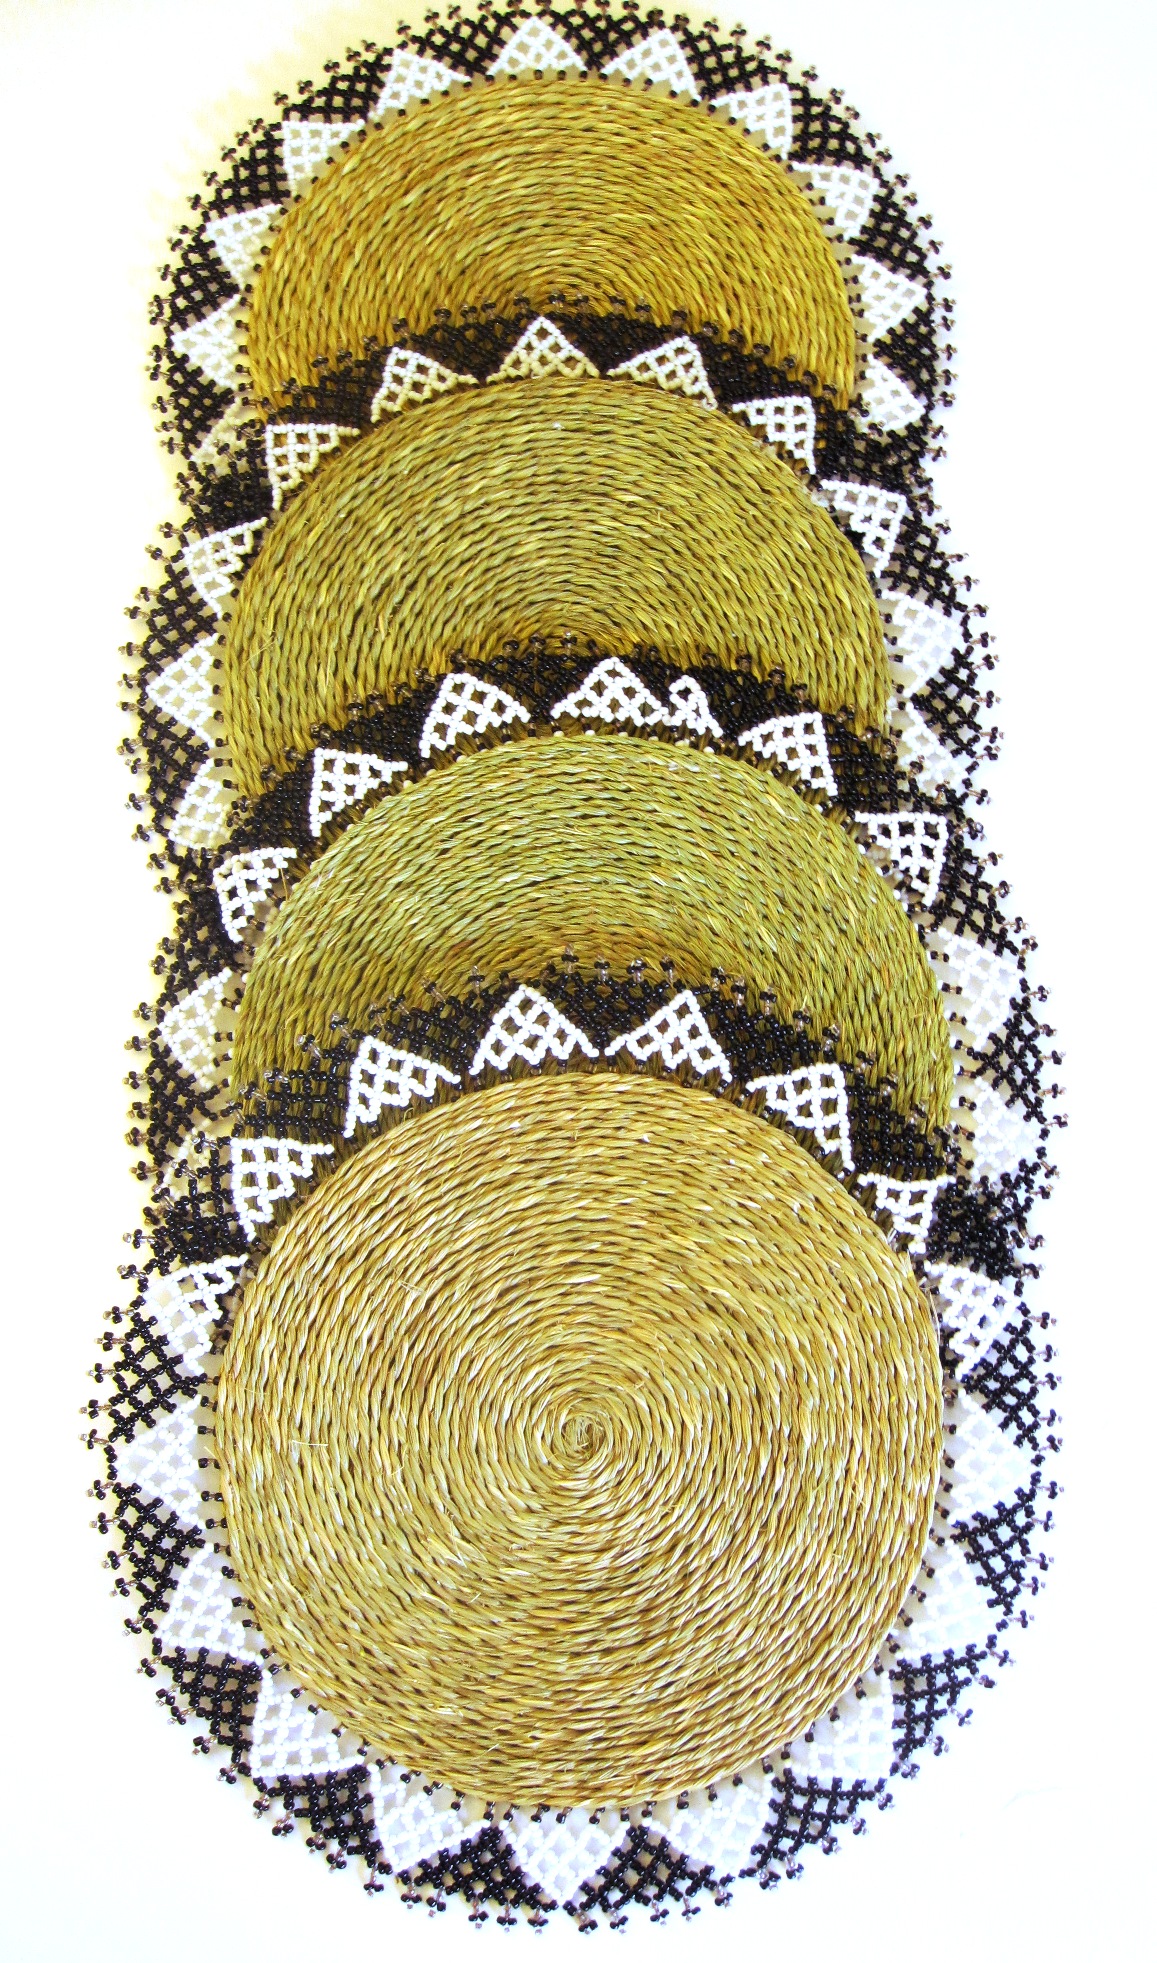 Ndebele Grass & Bead Placemat - Black & White - Large - Set of 4